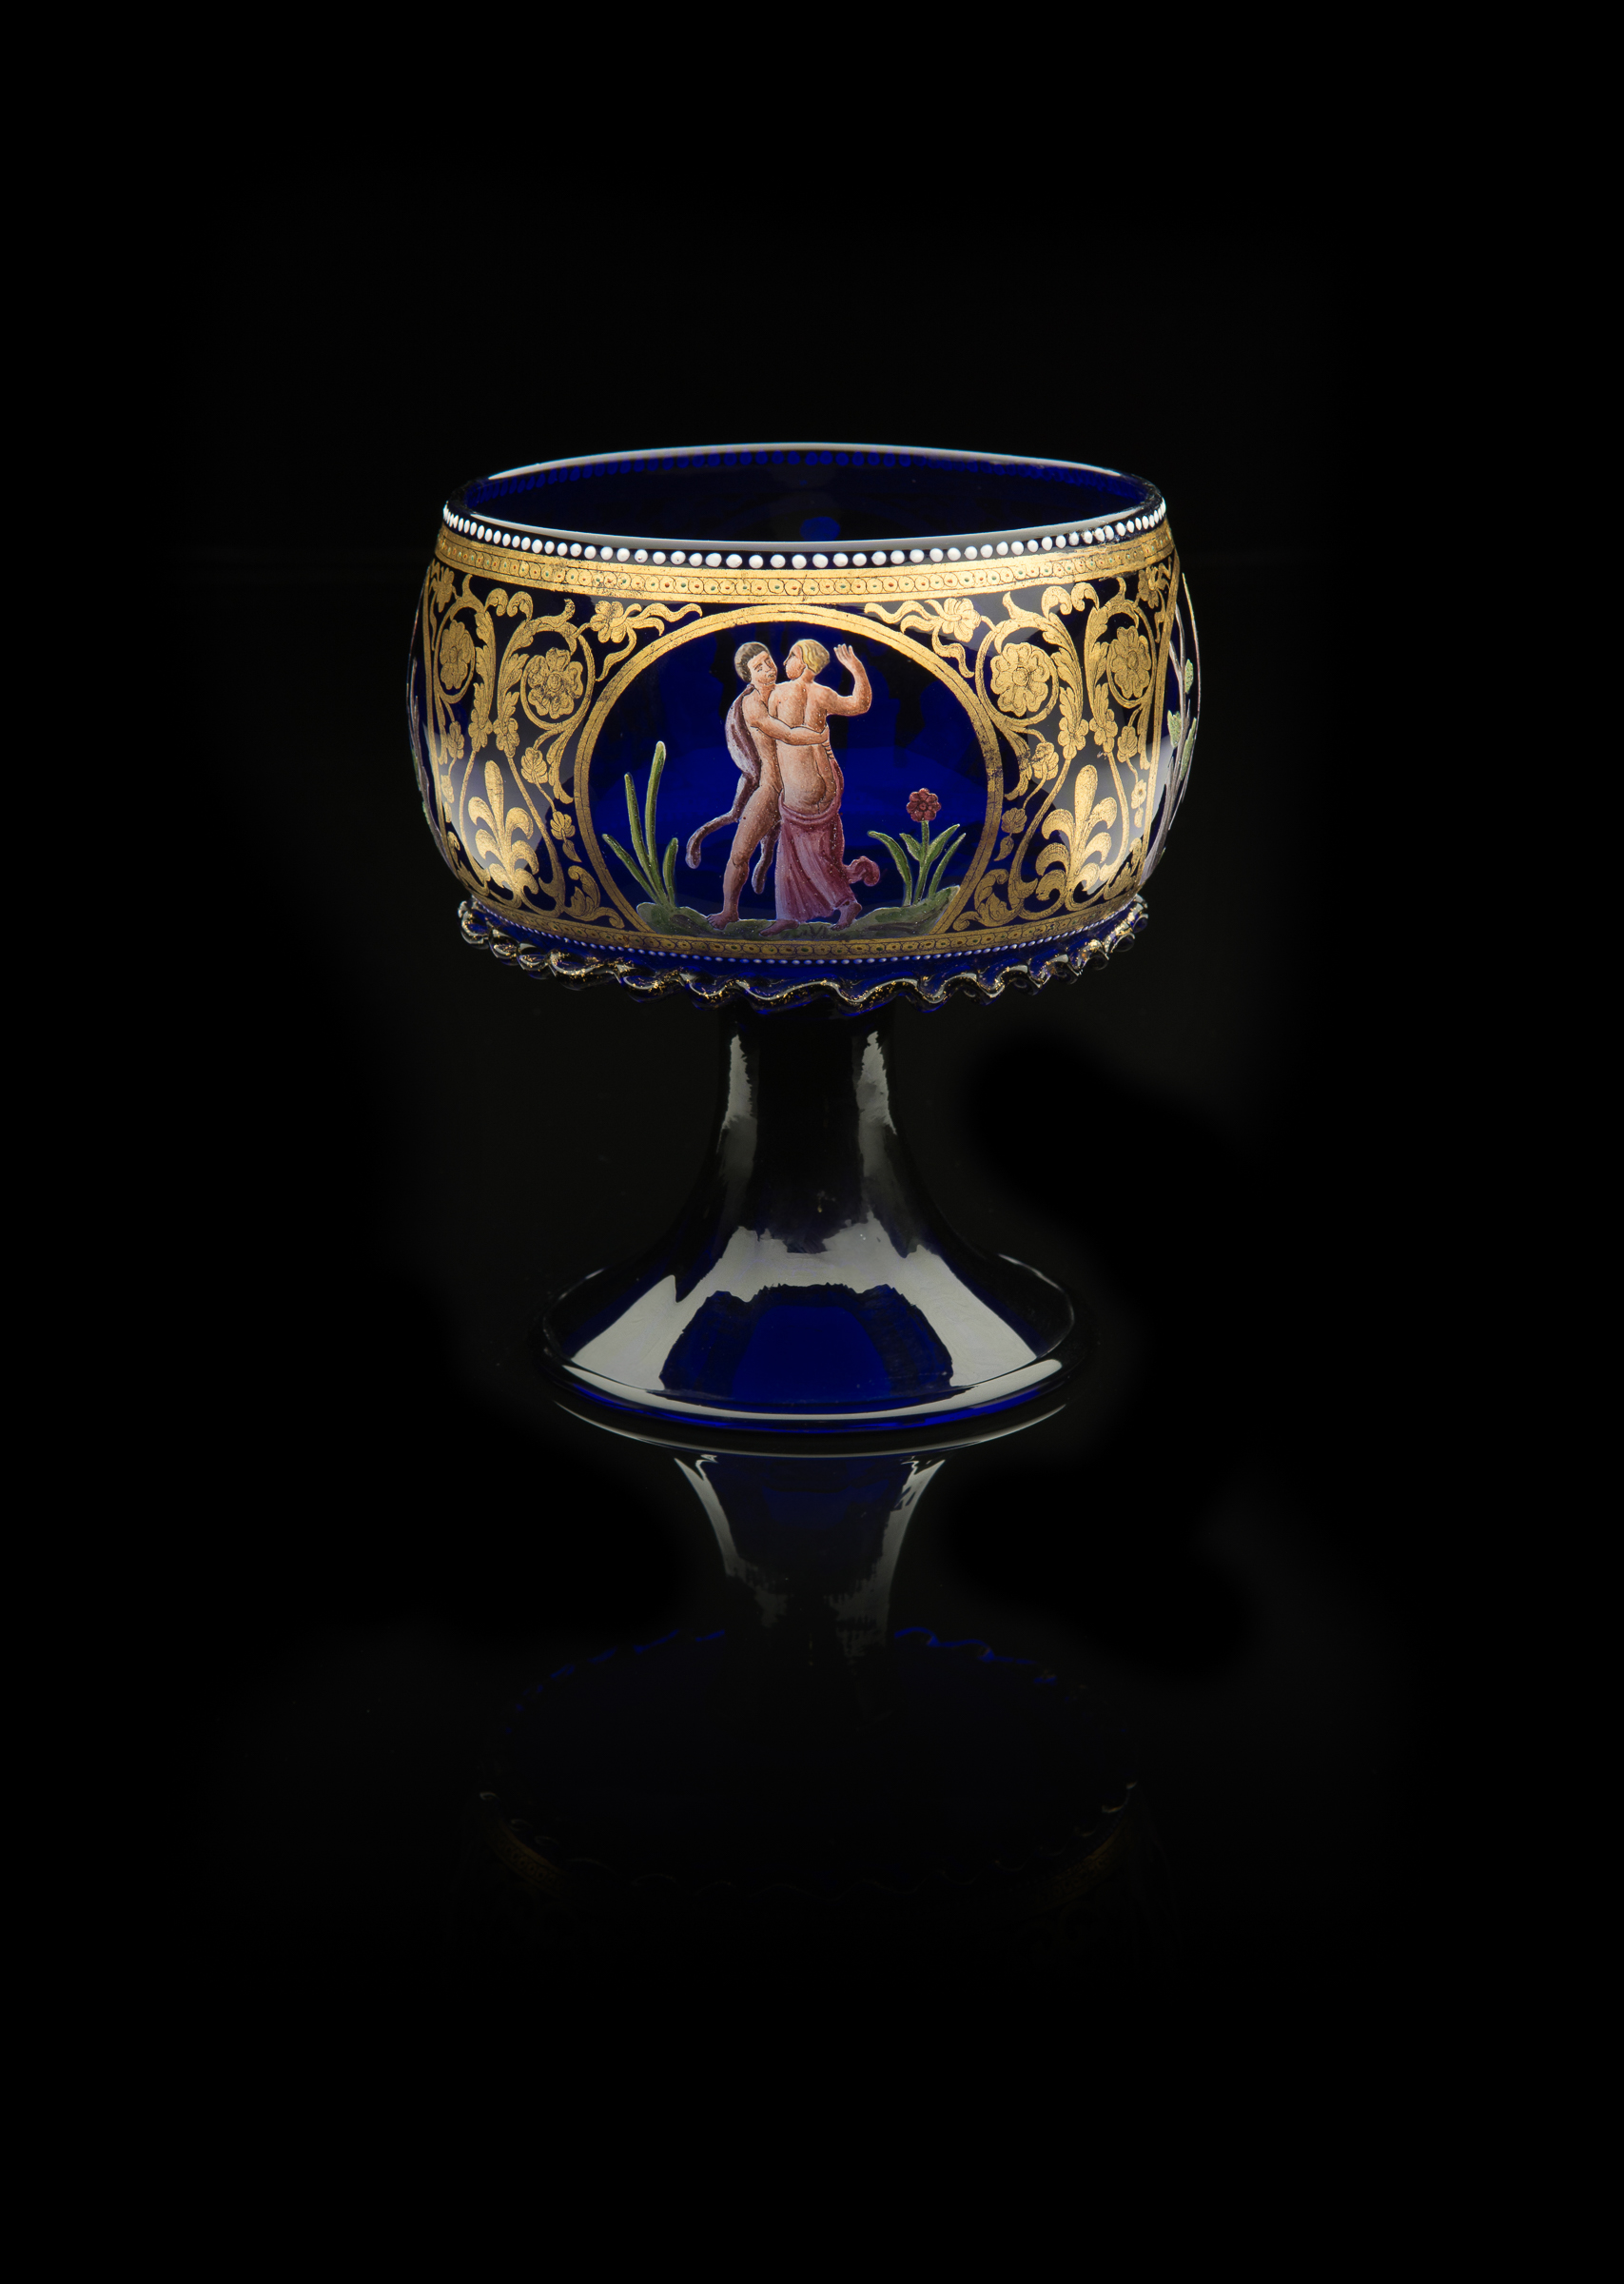  Venice and Murano Company,  Hercules Footed Bowl  (circa 1880, glass, 6 3/8 inches), VV.573 